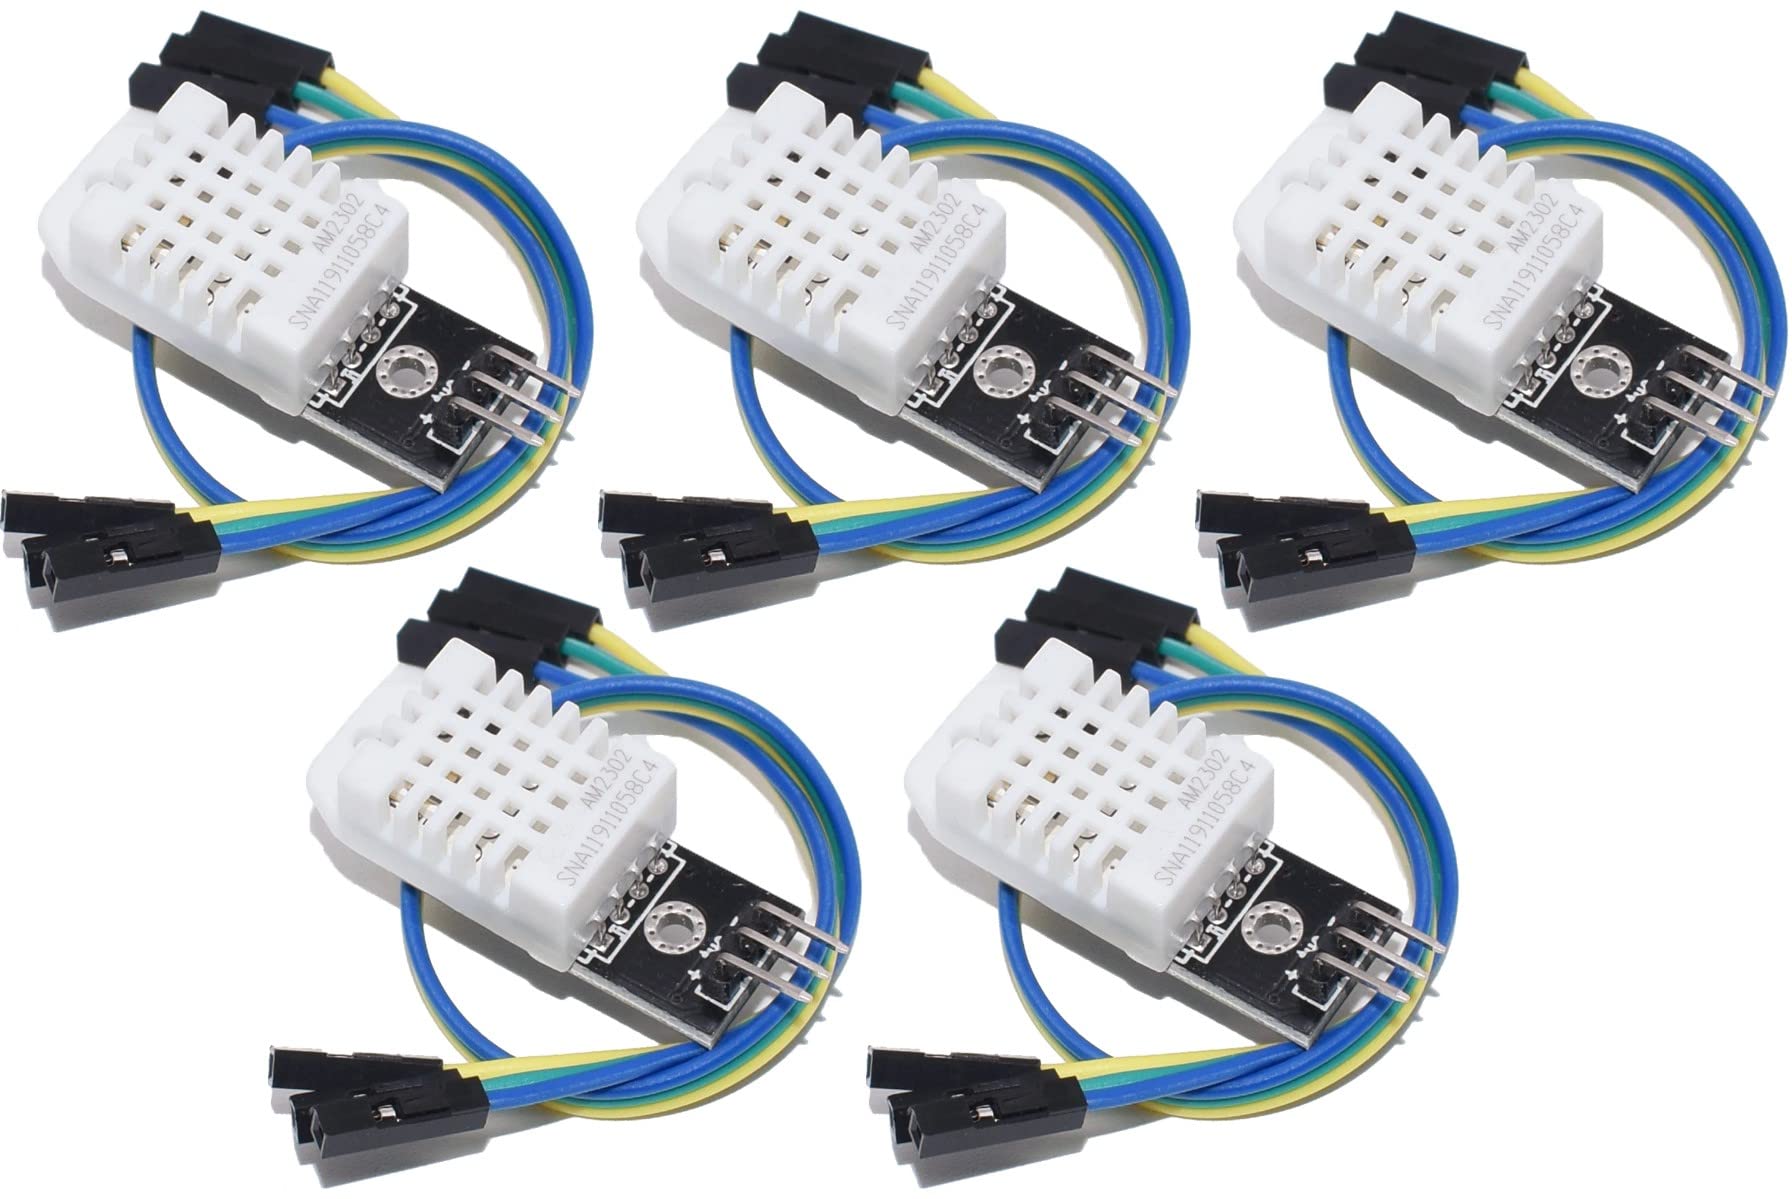 5pcs DHT22 Digital Temperature Humidity Sensor AM2302 Module with PCB and Cable